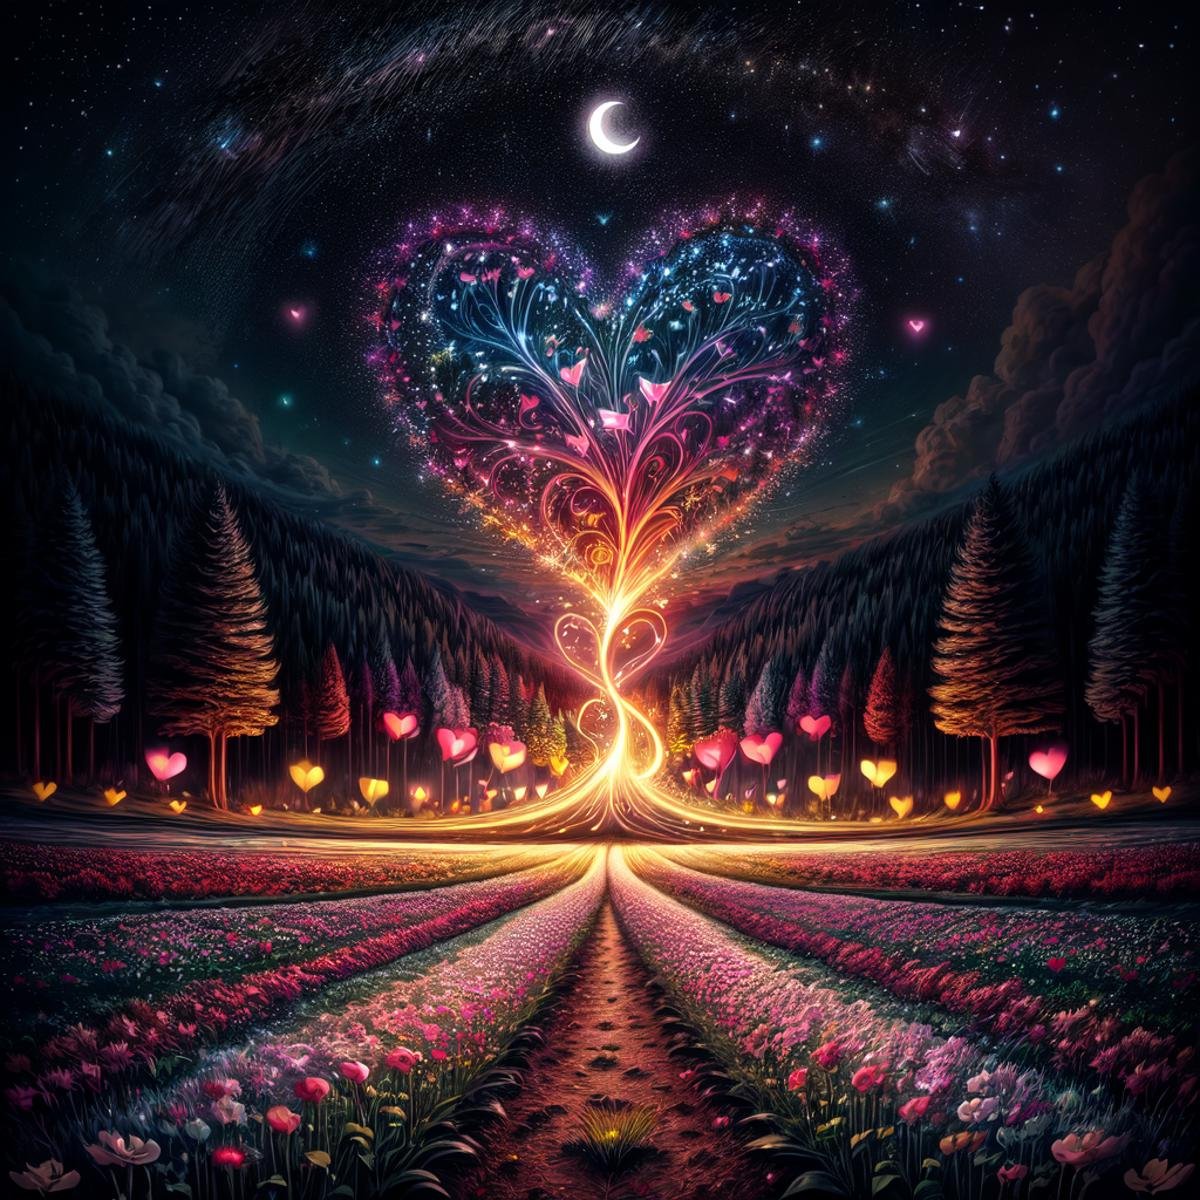 ValentineNatureStyle,flower,outdoors,sky,tree,no humans,night,grass,star (sky),heart shaped stars,heart shaped moon,nature,night sky,scenery,starry sky,field,colorful,heart shaped flower,valentine,  <lora:ValentineNatureStyle:1>, <lora:add_detail:0.8> <lora:more_details:0.8> <lora:colorfix:0.8>